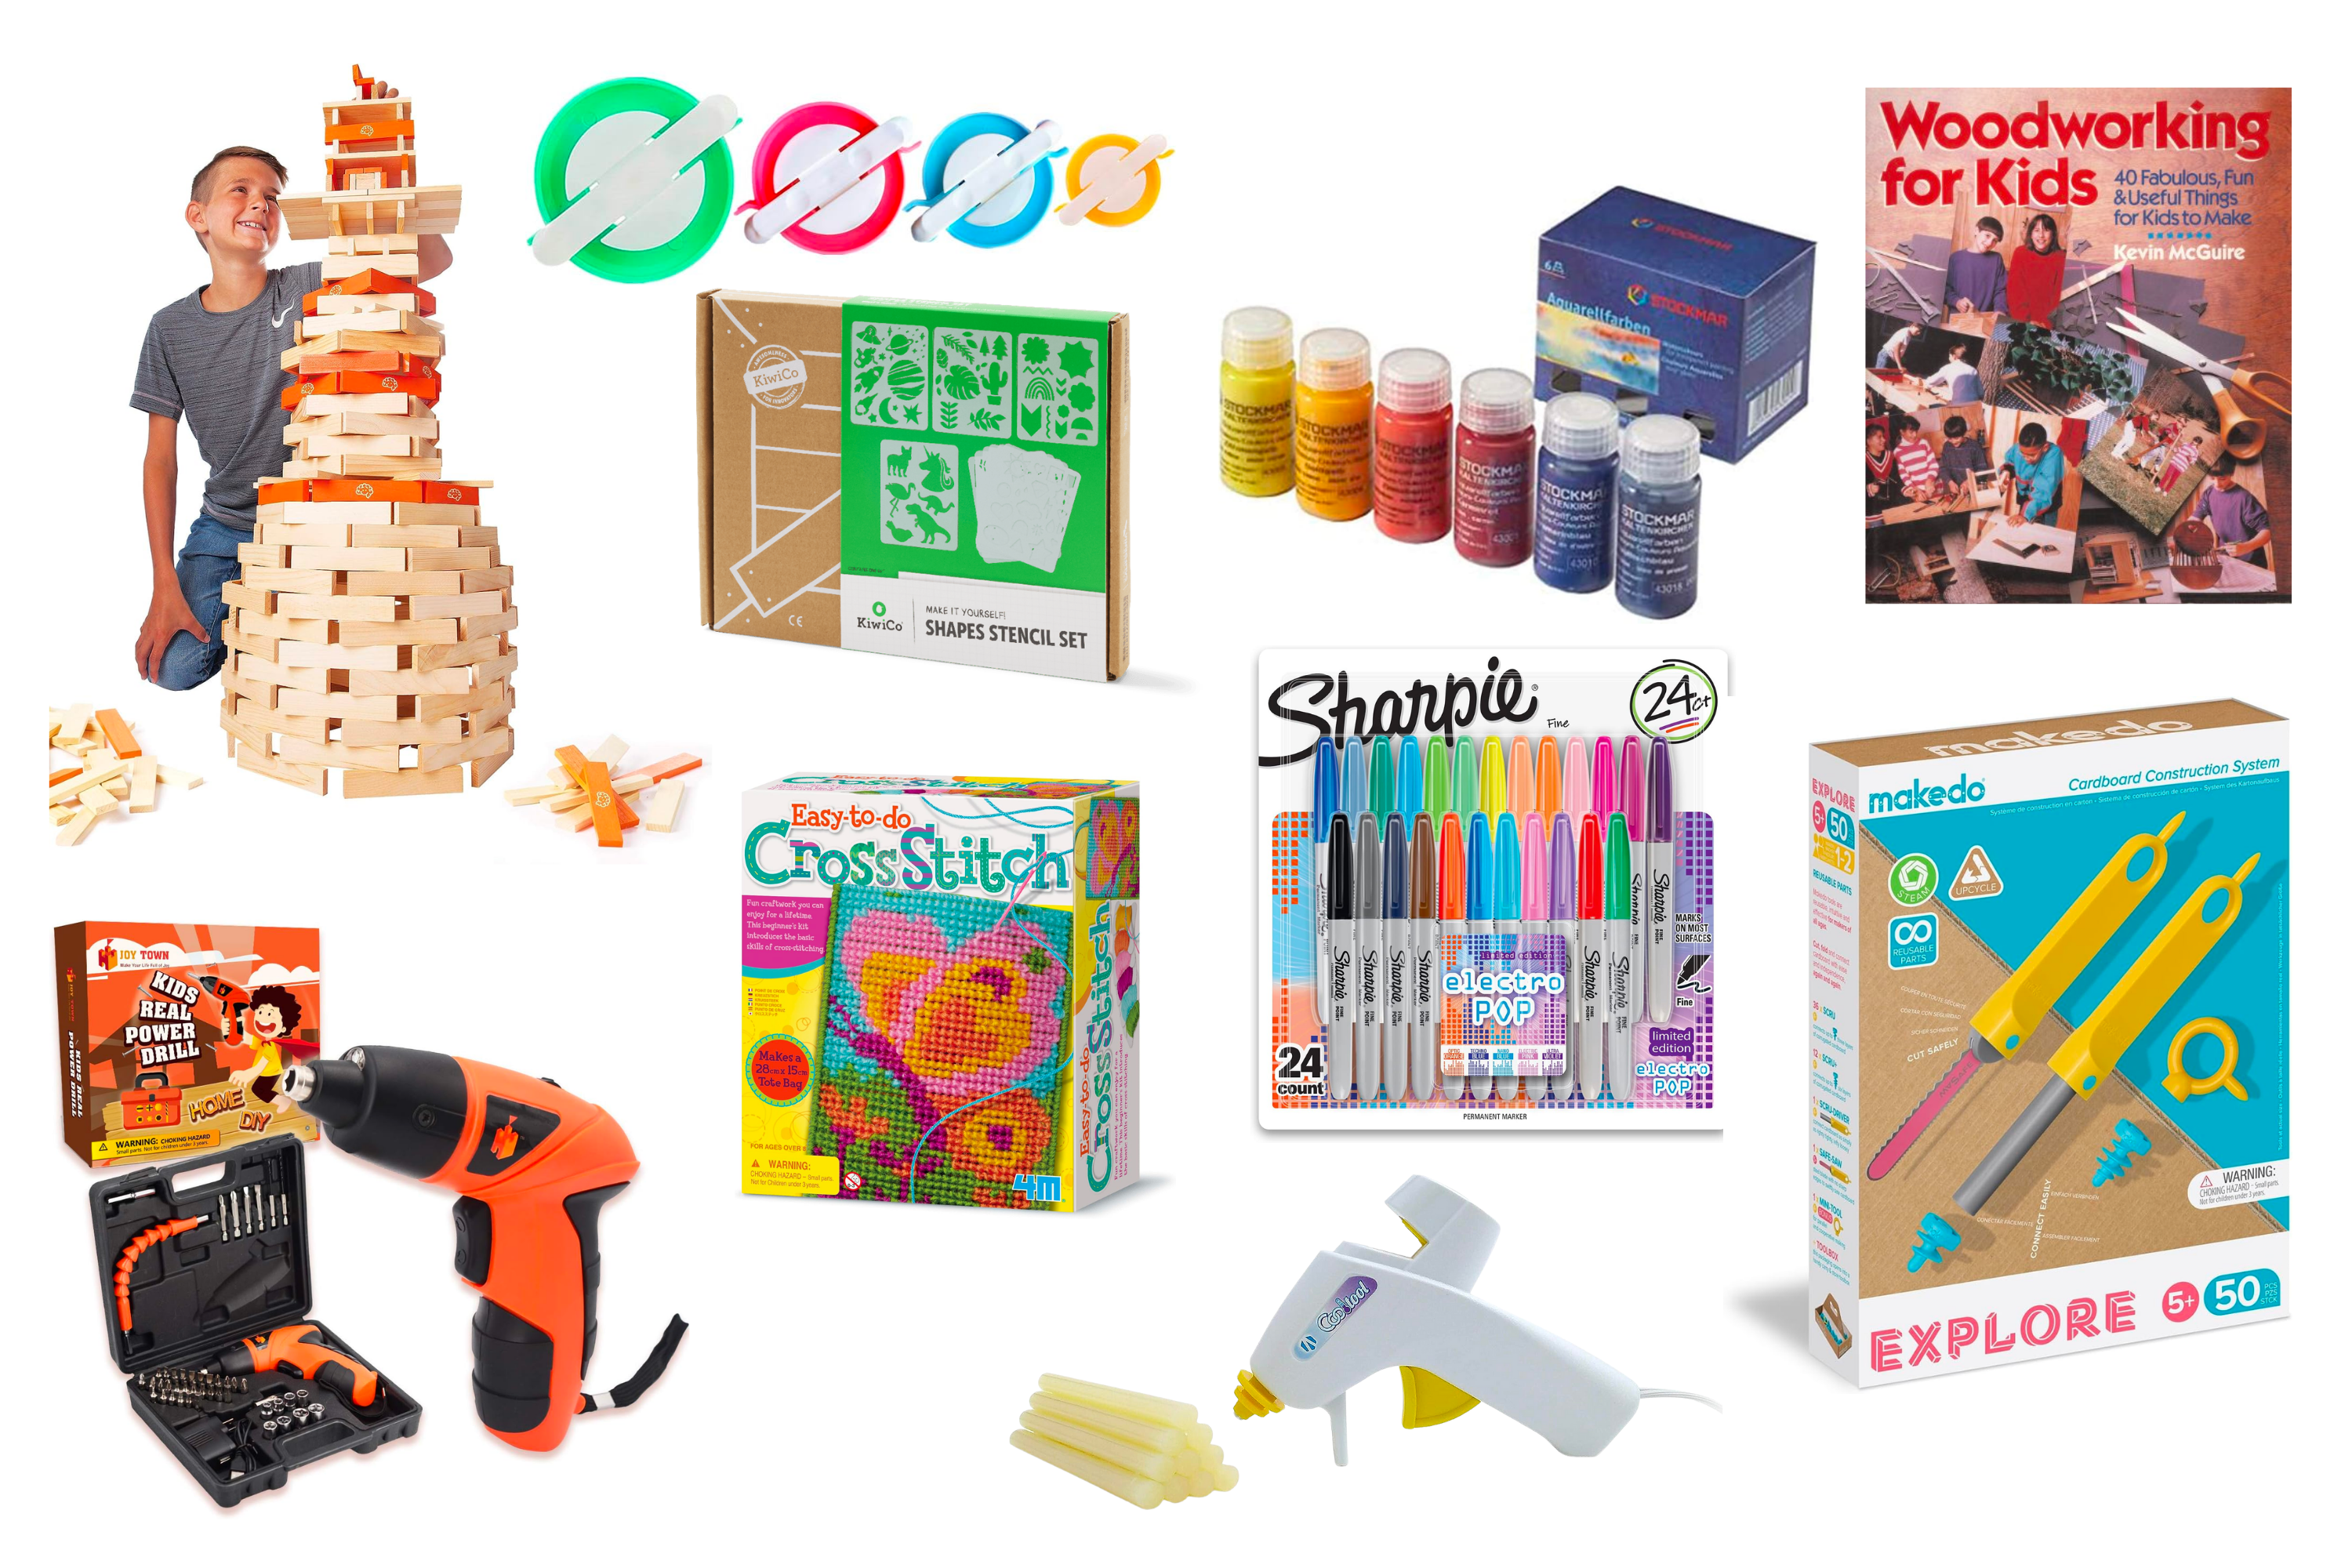 Gift list of Montessori inspired toys for kids that love lego, building, woodworking and more curated by interest for ages 6 to 12.